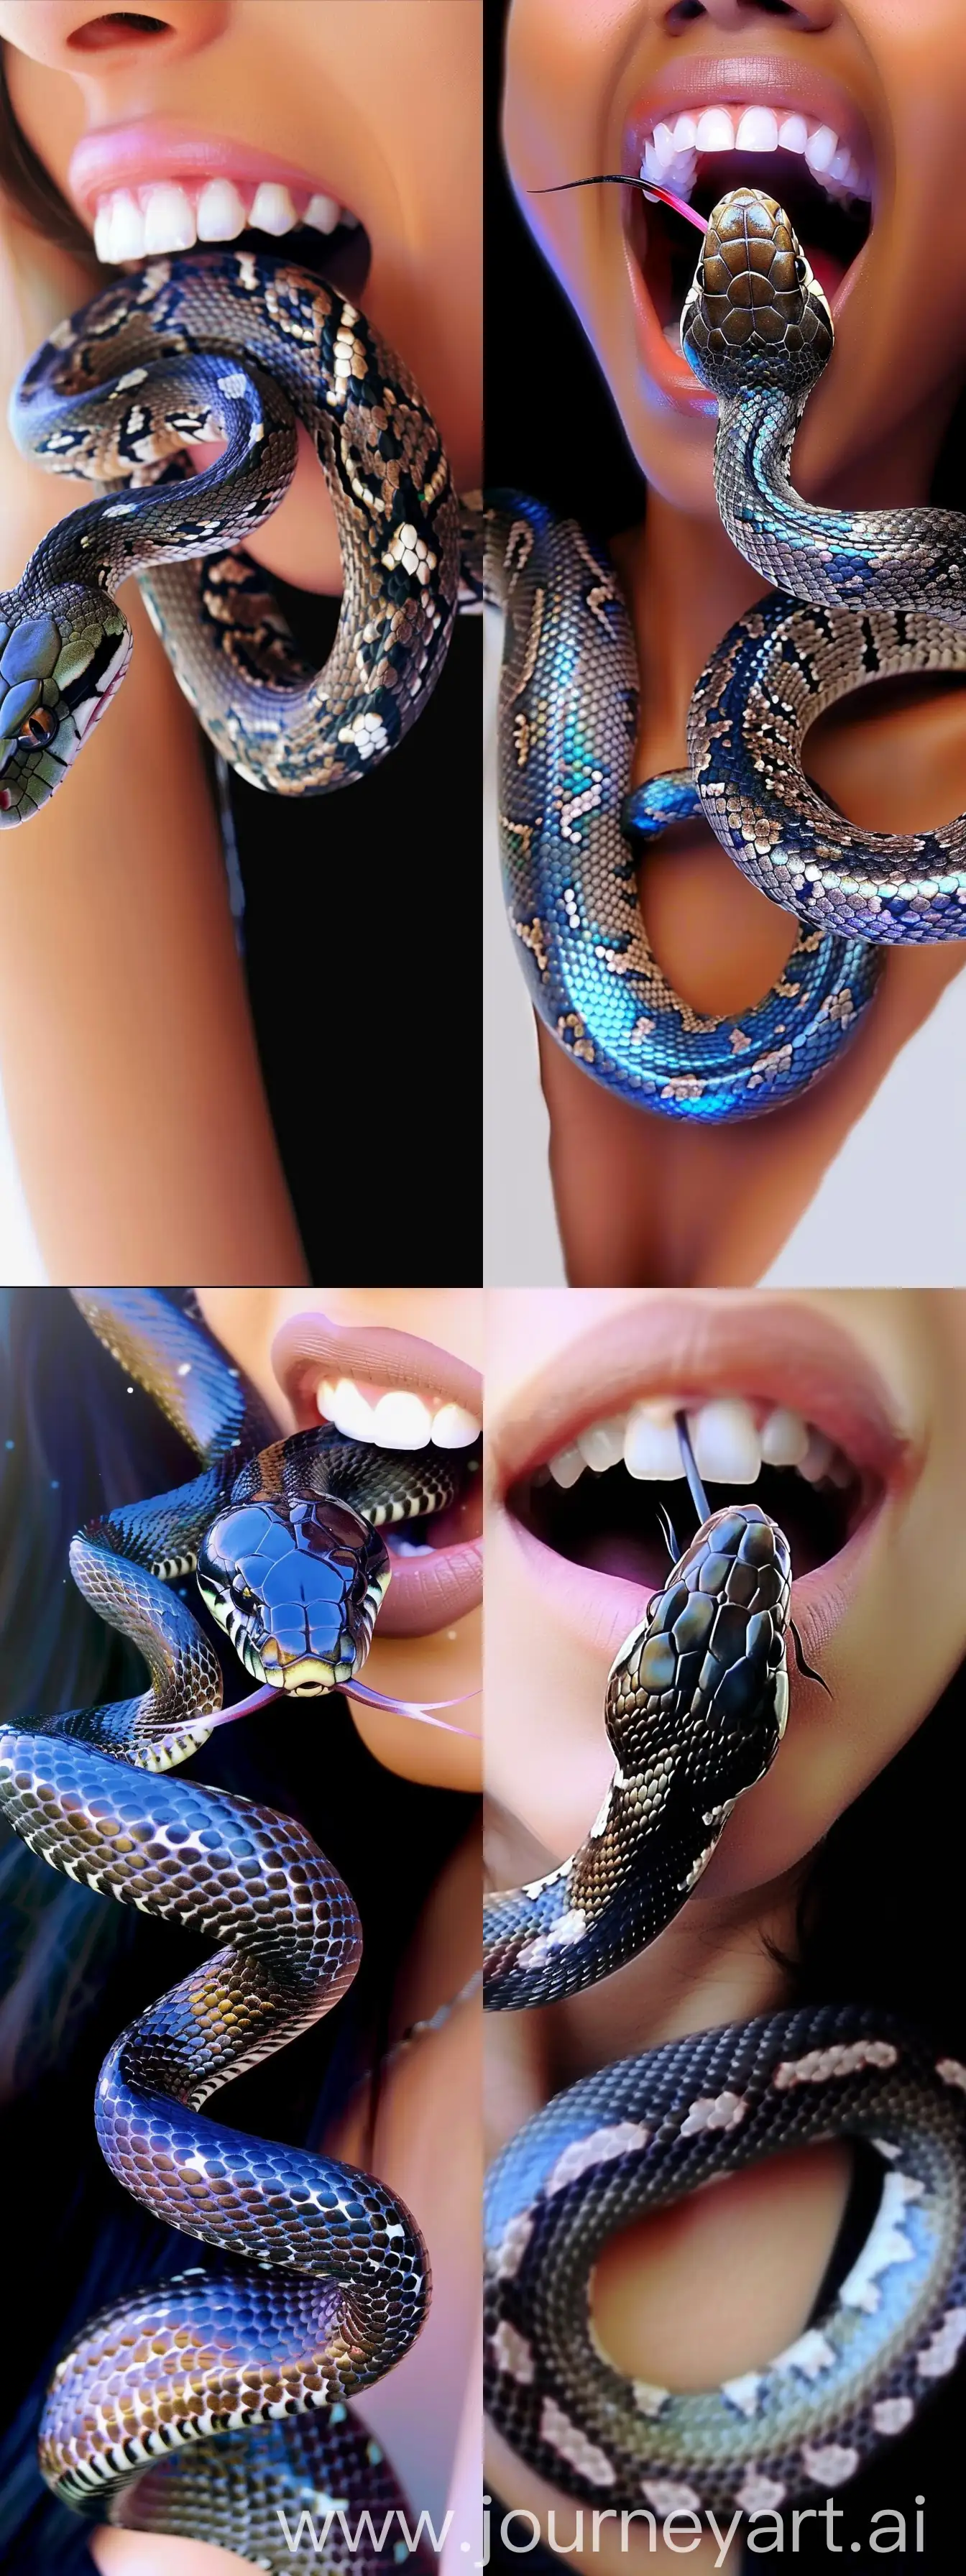 A portrait of a snake coming out of a woman's mouth, studio photo, white background --sref https://i.pinimg.com/originals/1c/46/8a/1c468ab47254128677bae852aed08dce.jpg --v 6 --style raw --ar 6:16